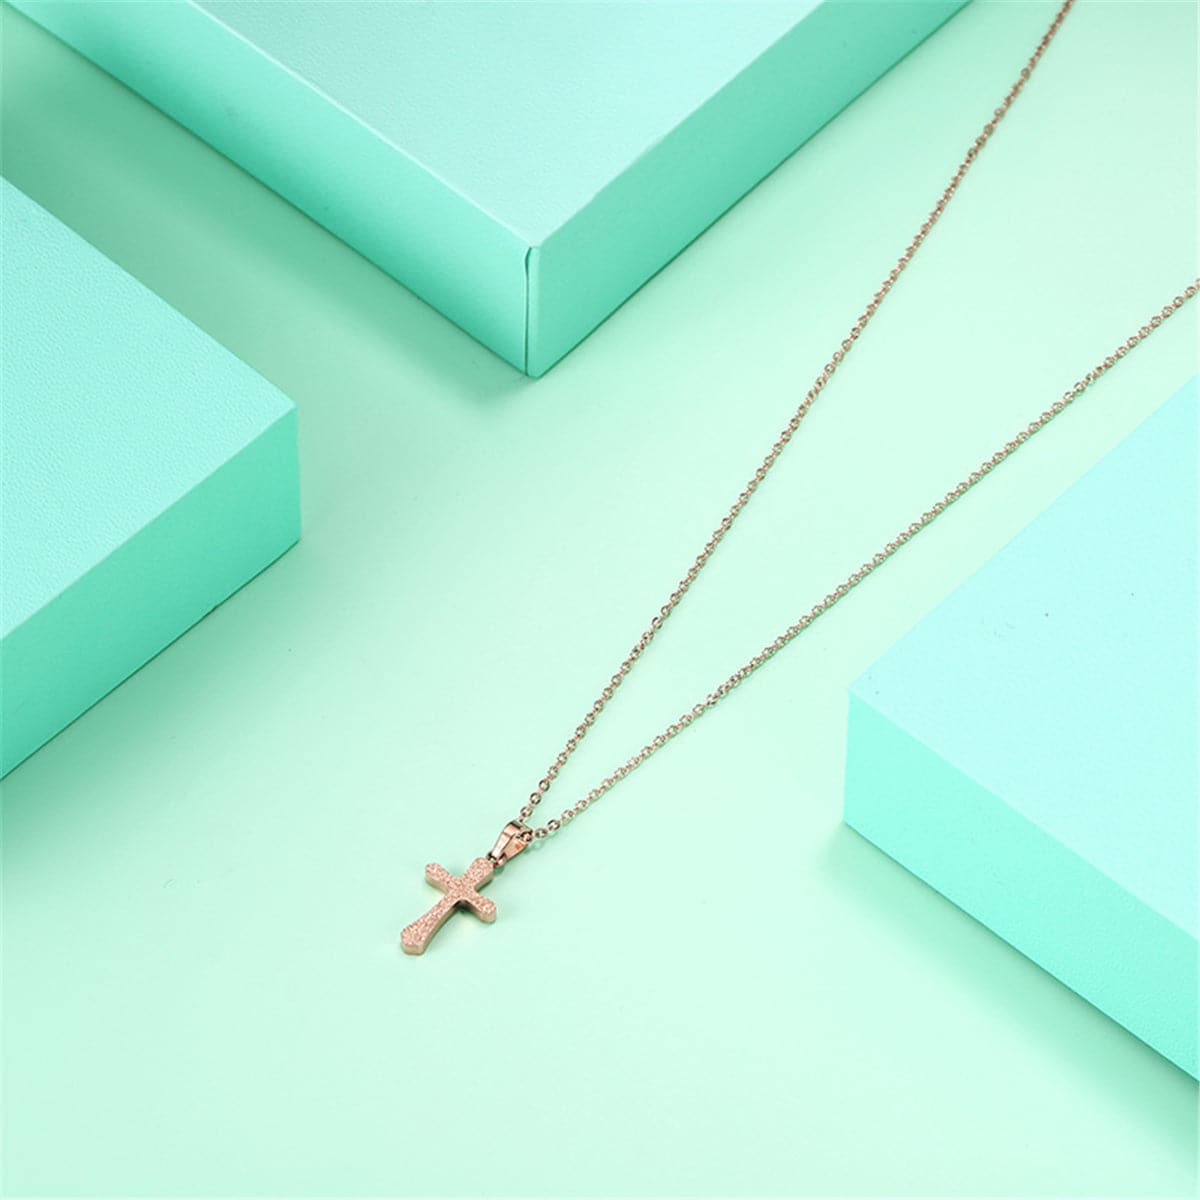 18K Rose Gold-Plated Frosted Cross Pendant Necklace